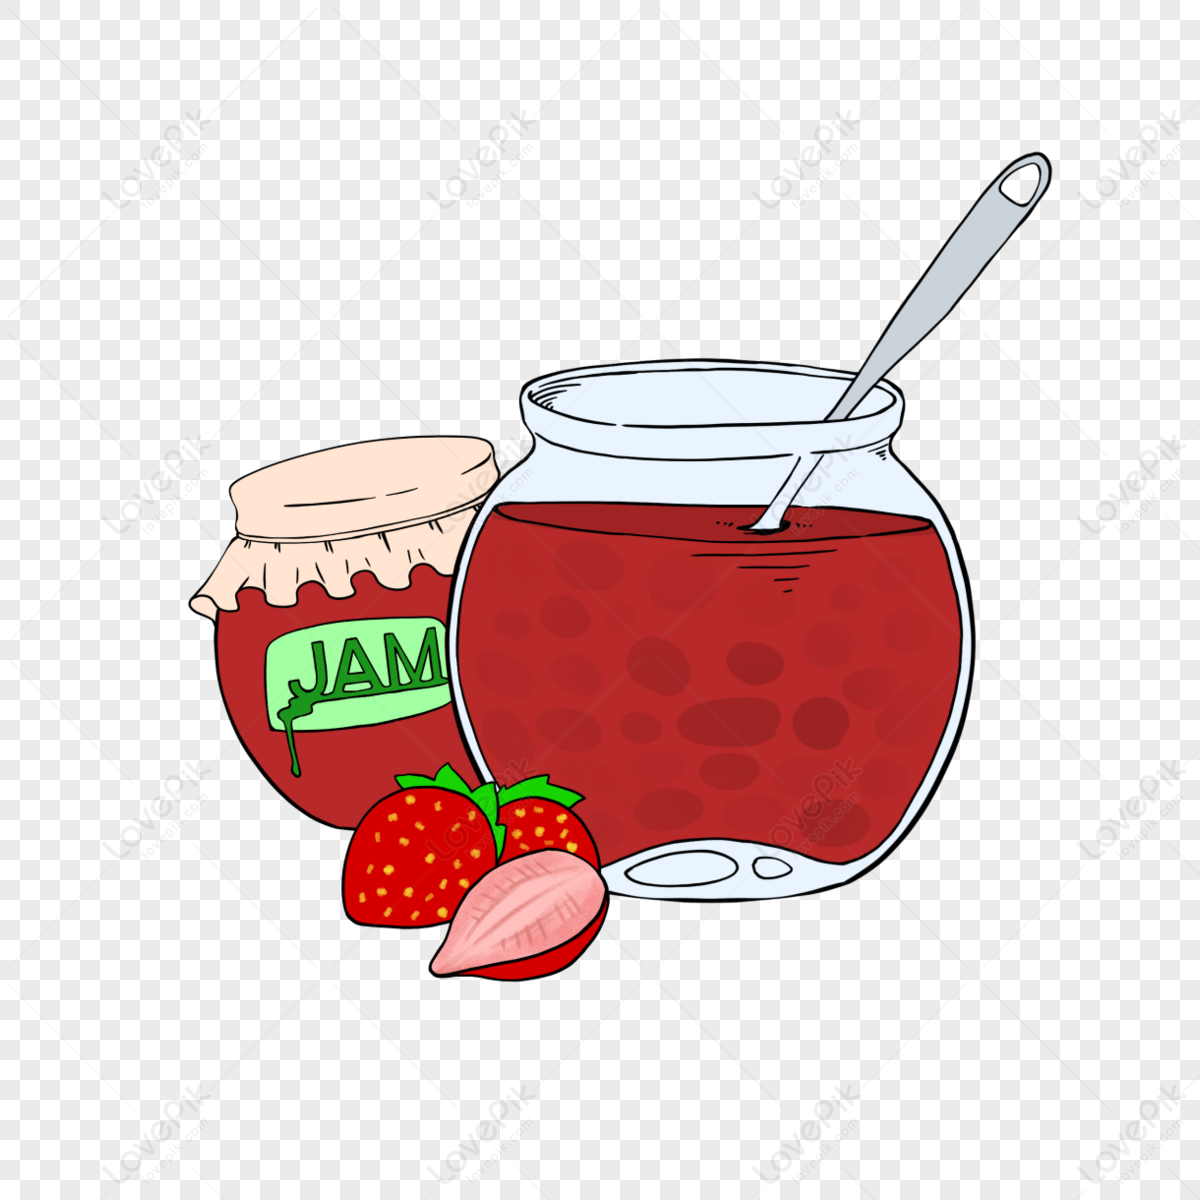 Strawberry Jam Clipart Cartoon Style Strawberry,strawberries PNG Image ...